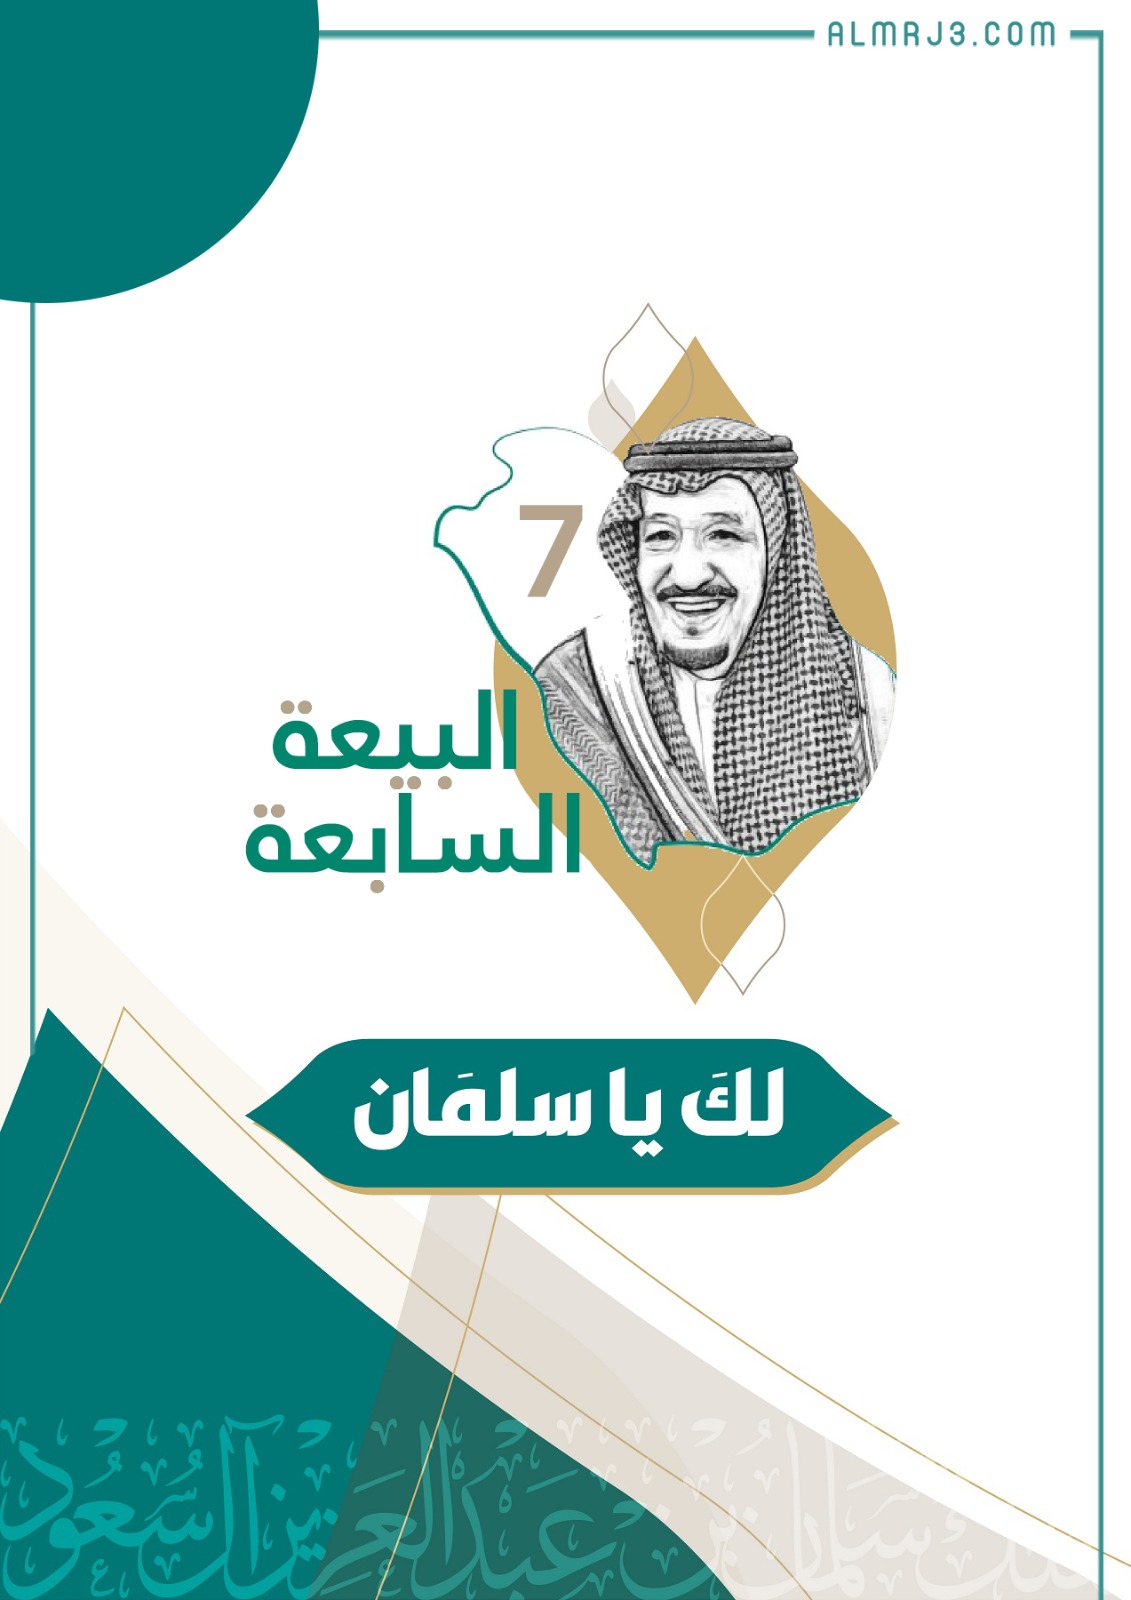 An expression about the seventh pledge of allegiance to King Salman